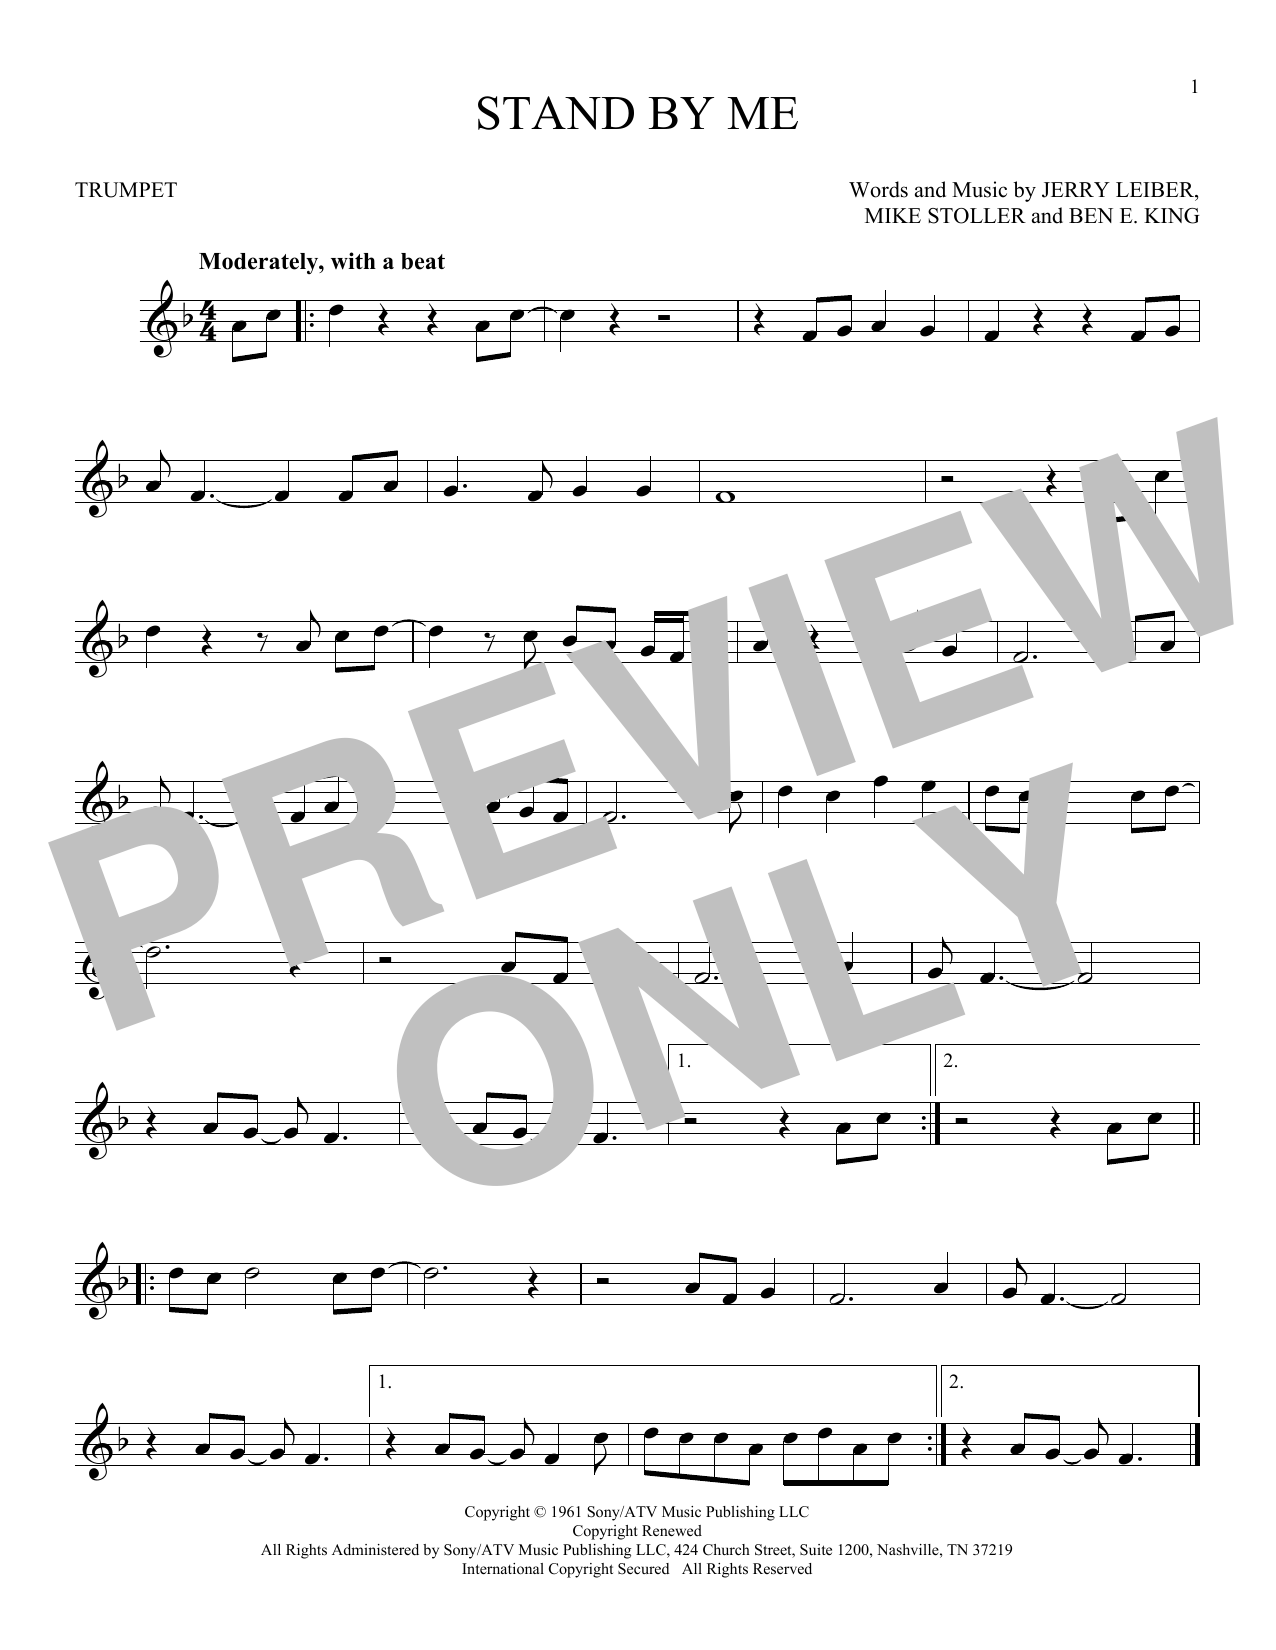 Download Ben E. King Stand By Me Sheet Music